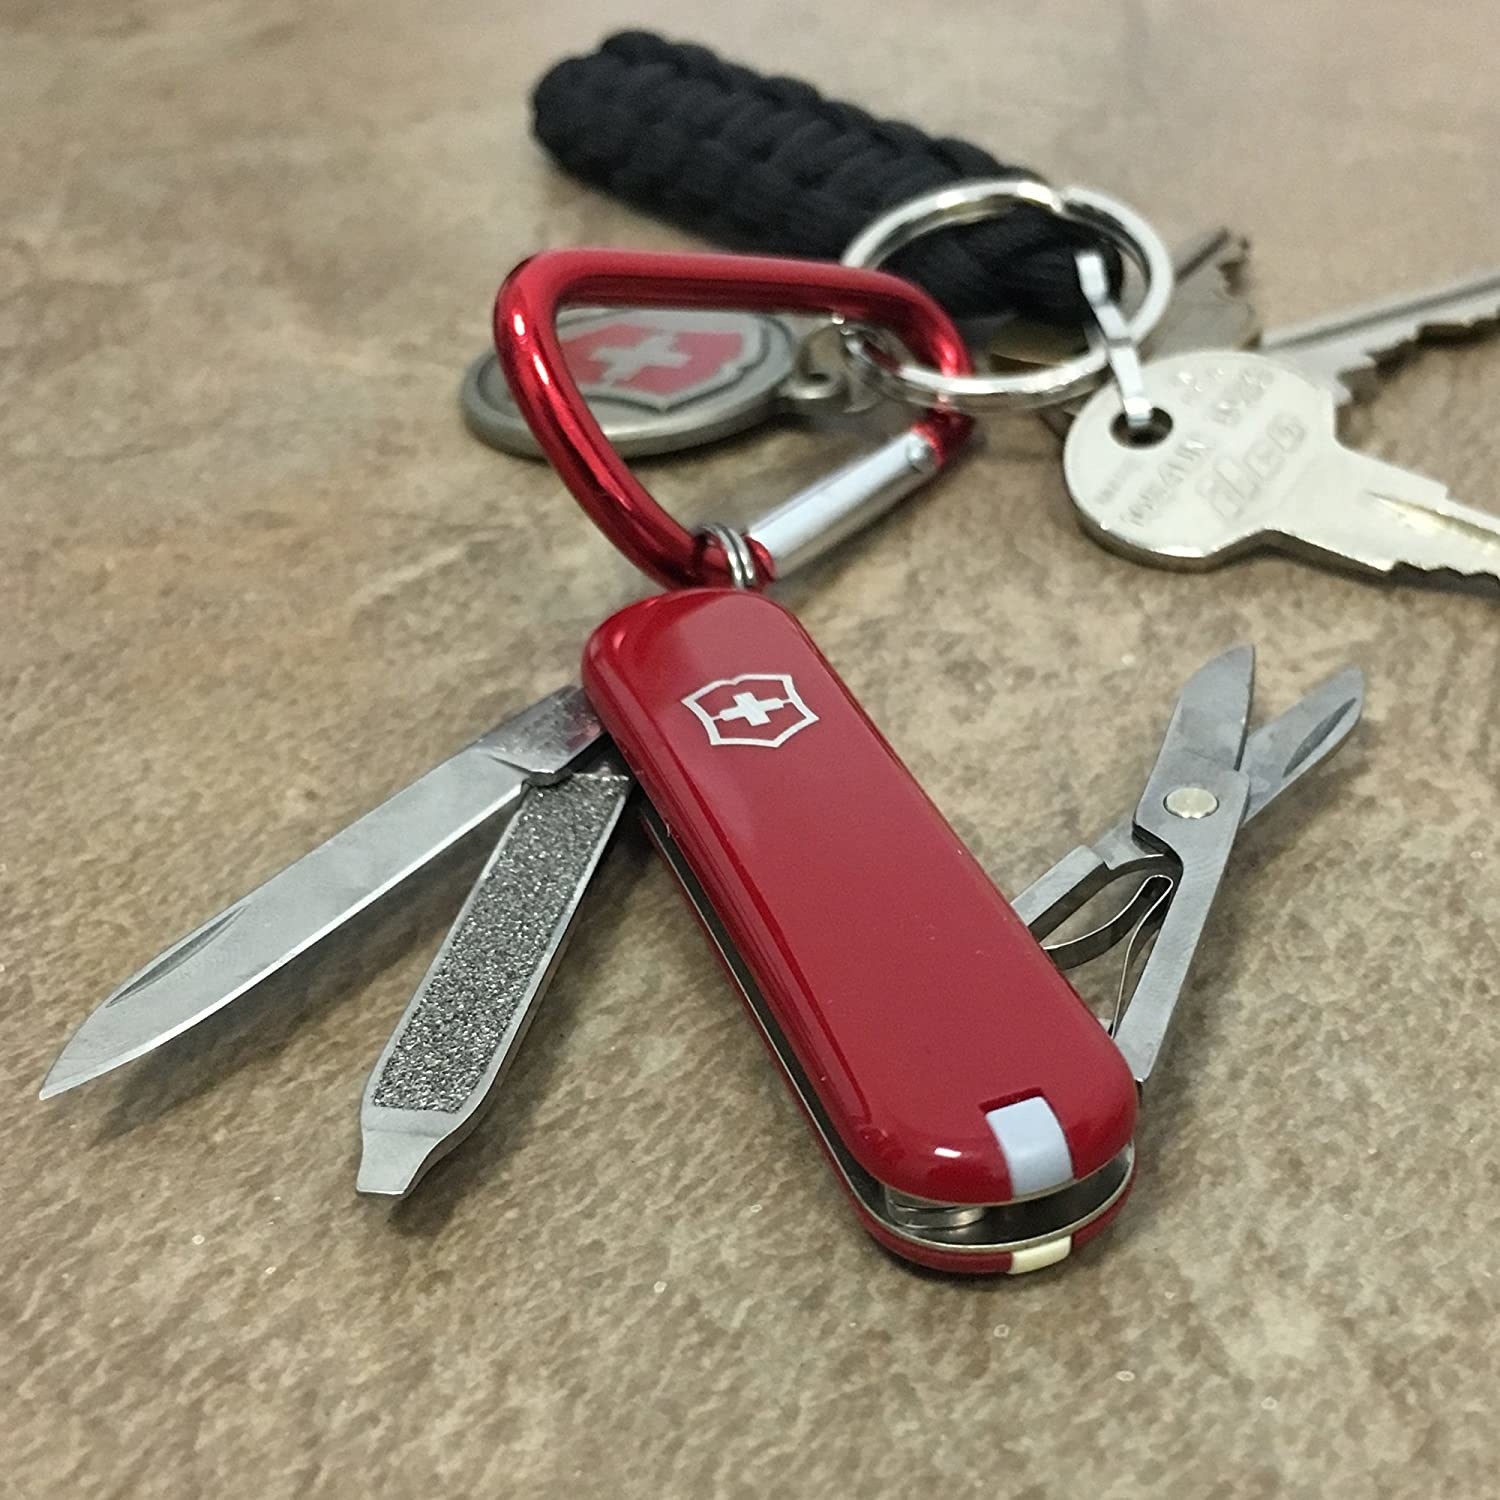 A Swiss Army knife attached to keys 